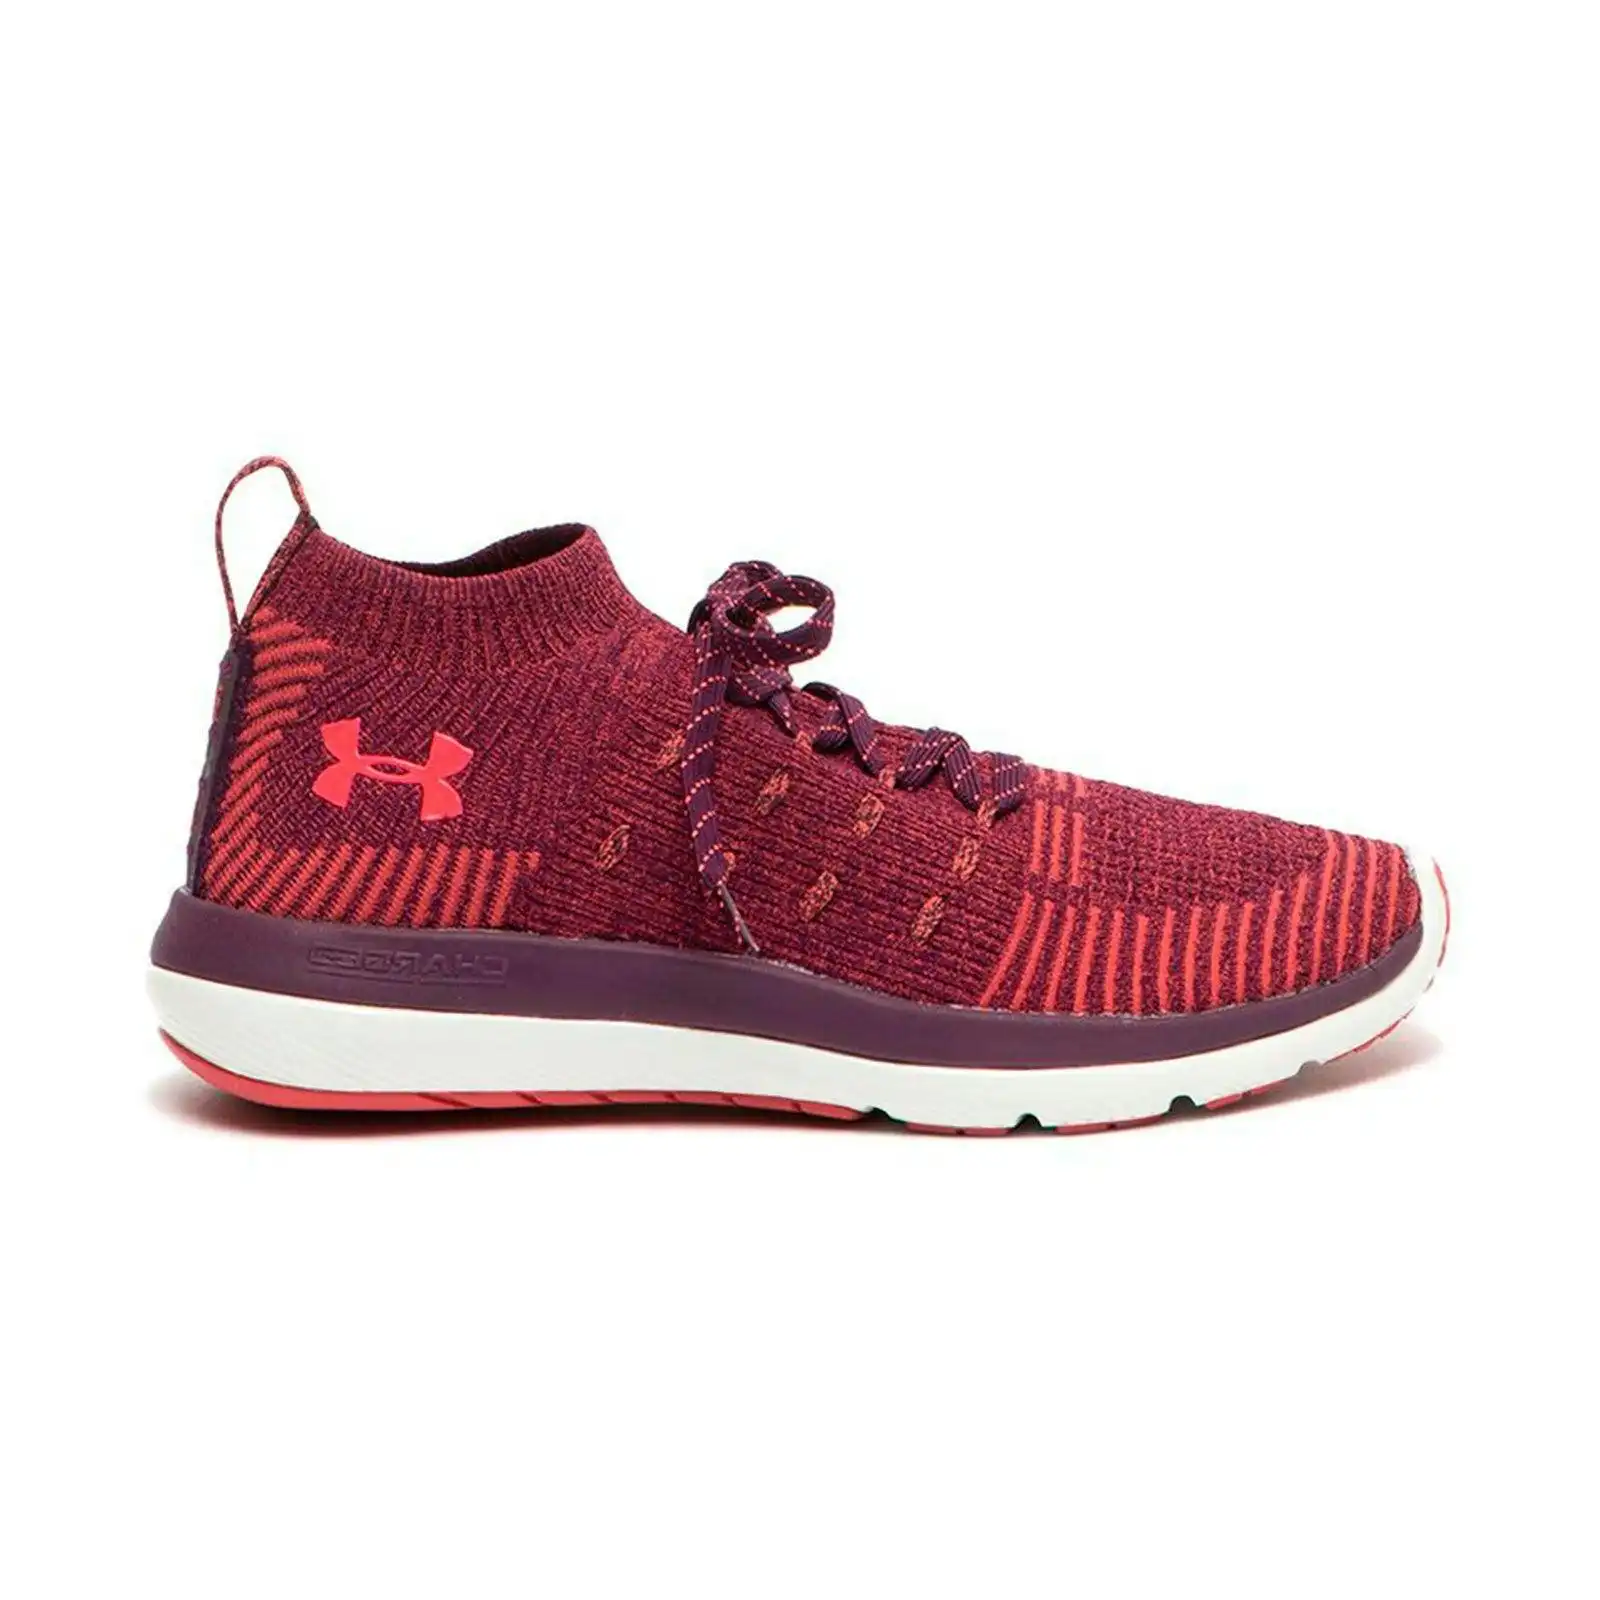 Under Armour Women's Slingflex Rise Athletic Sneaker - Red